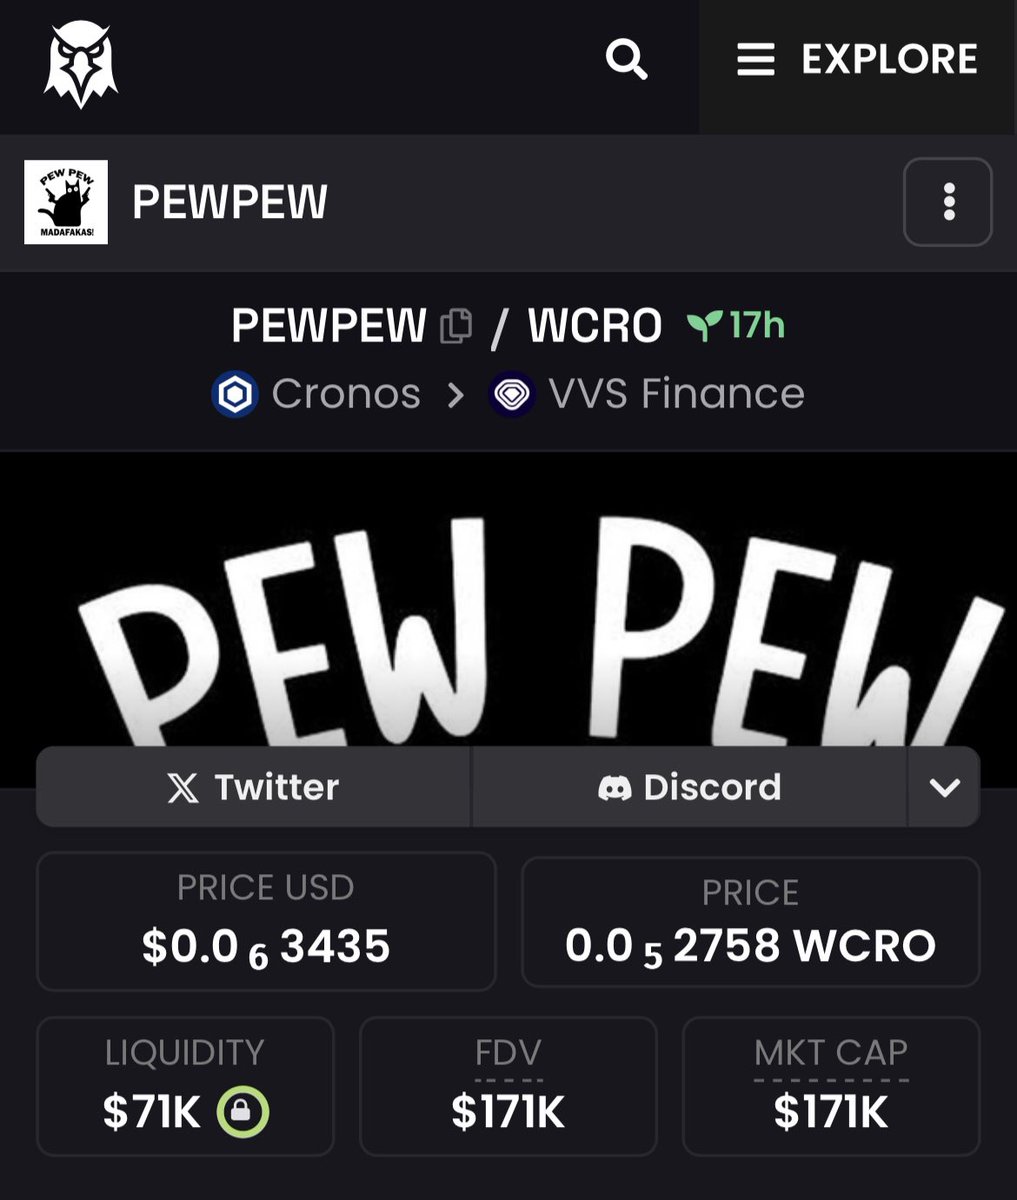 🚀🔫 $PEWPEW GIVEAWAY 🔫🚀

🎁 Prize: 10M $PEWPEW + 100 CRO 

📈CA: 0xfB74f2F974D55d22B1F987478bA980c2F268D303

• Liquidity🔒 
• Contract renounced🔑

1️⃣ RT & Tag 3 Frens 
2️⃣ Follow @pewpewcro & @Sir_Slowmotion

📆Ends in 48 Hrs

#Cronos #crofam #bornbrave #CRO #memecoin